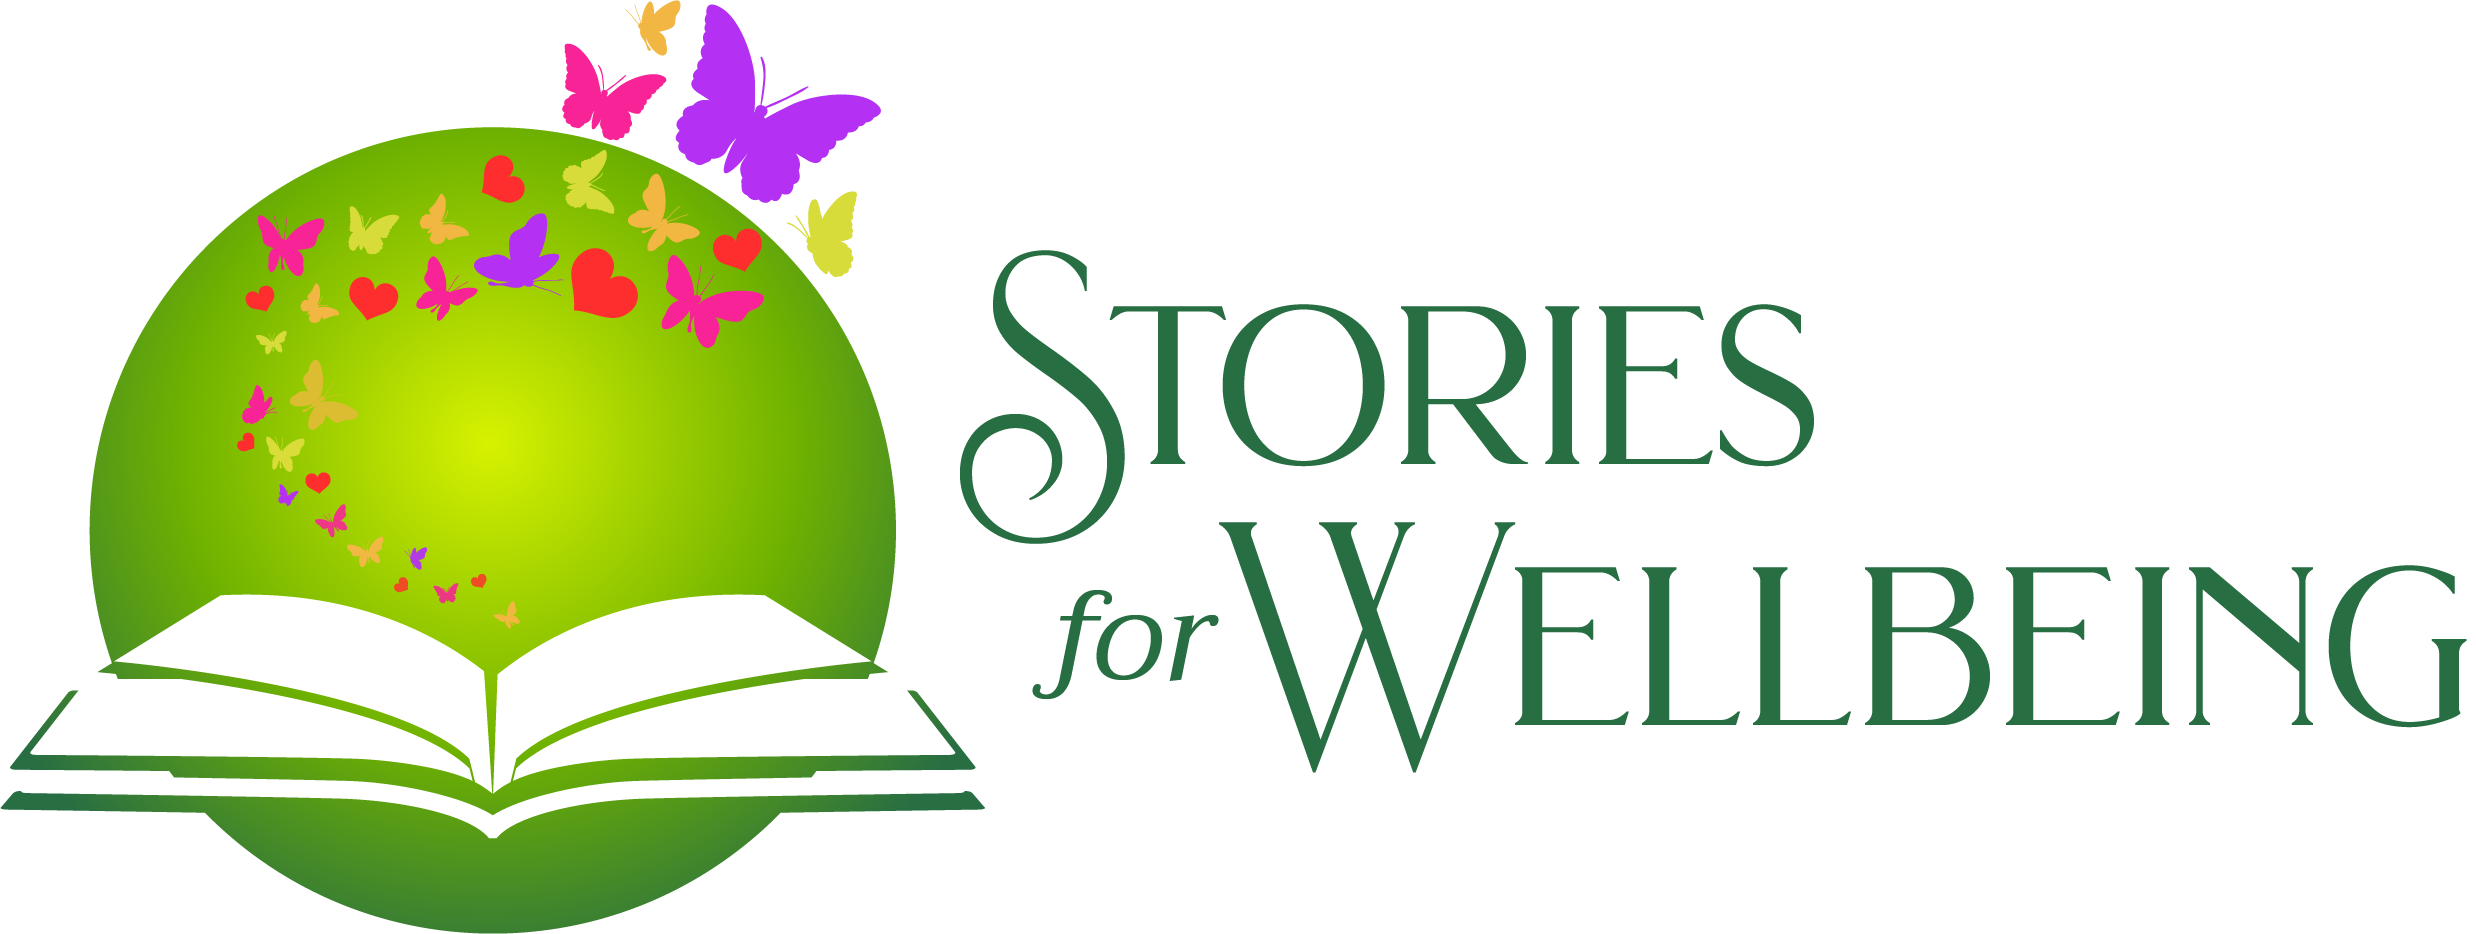 Stories for Wellbeing